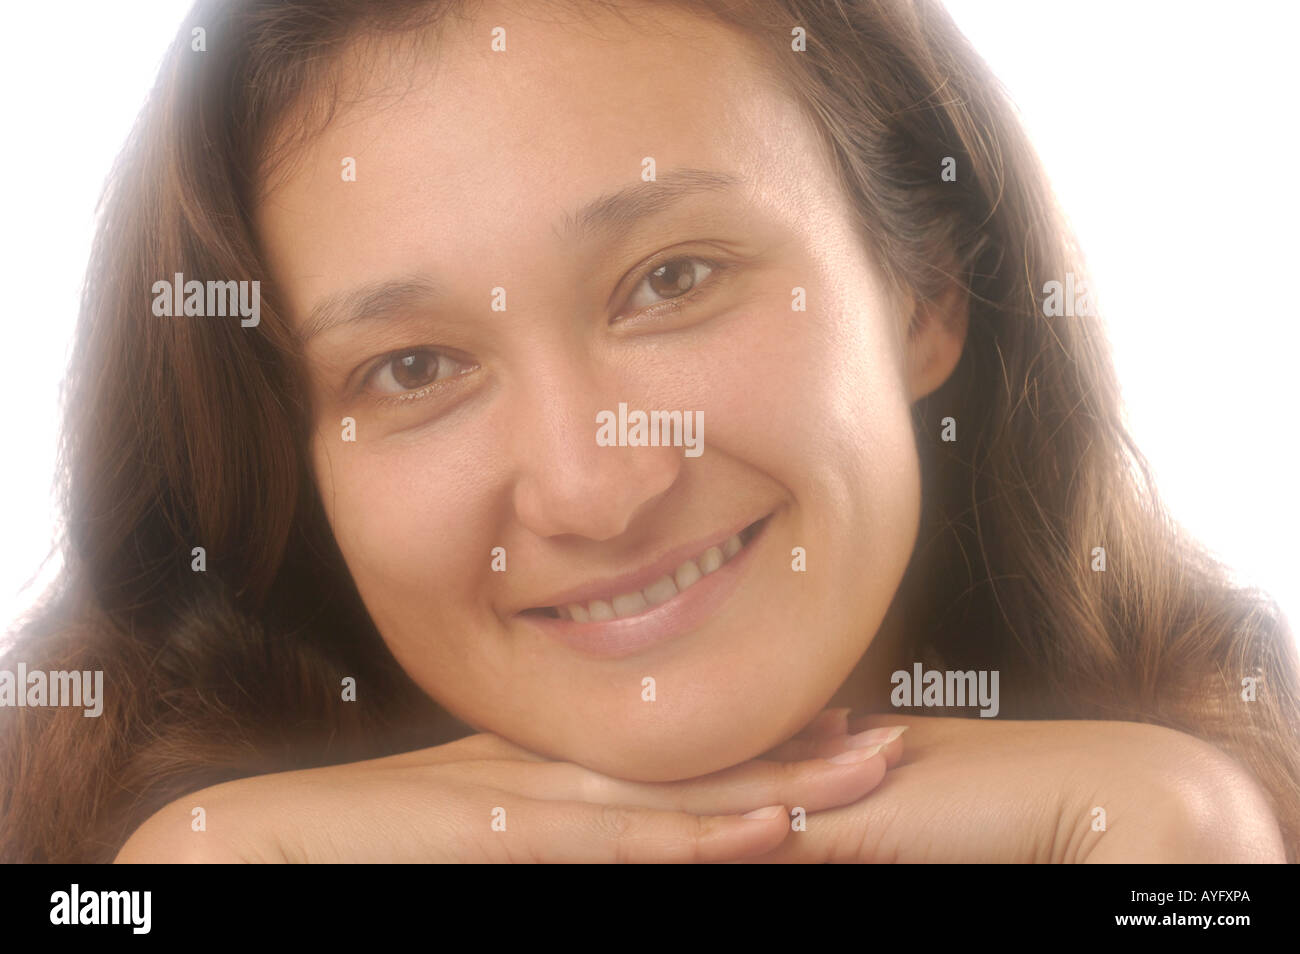 Young smiling woman Stock Photo